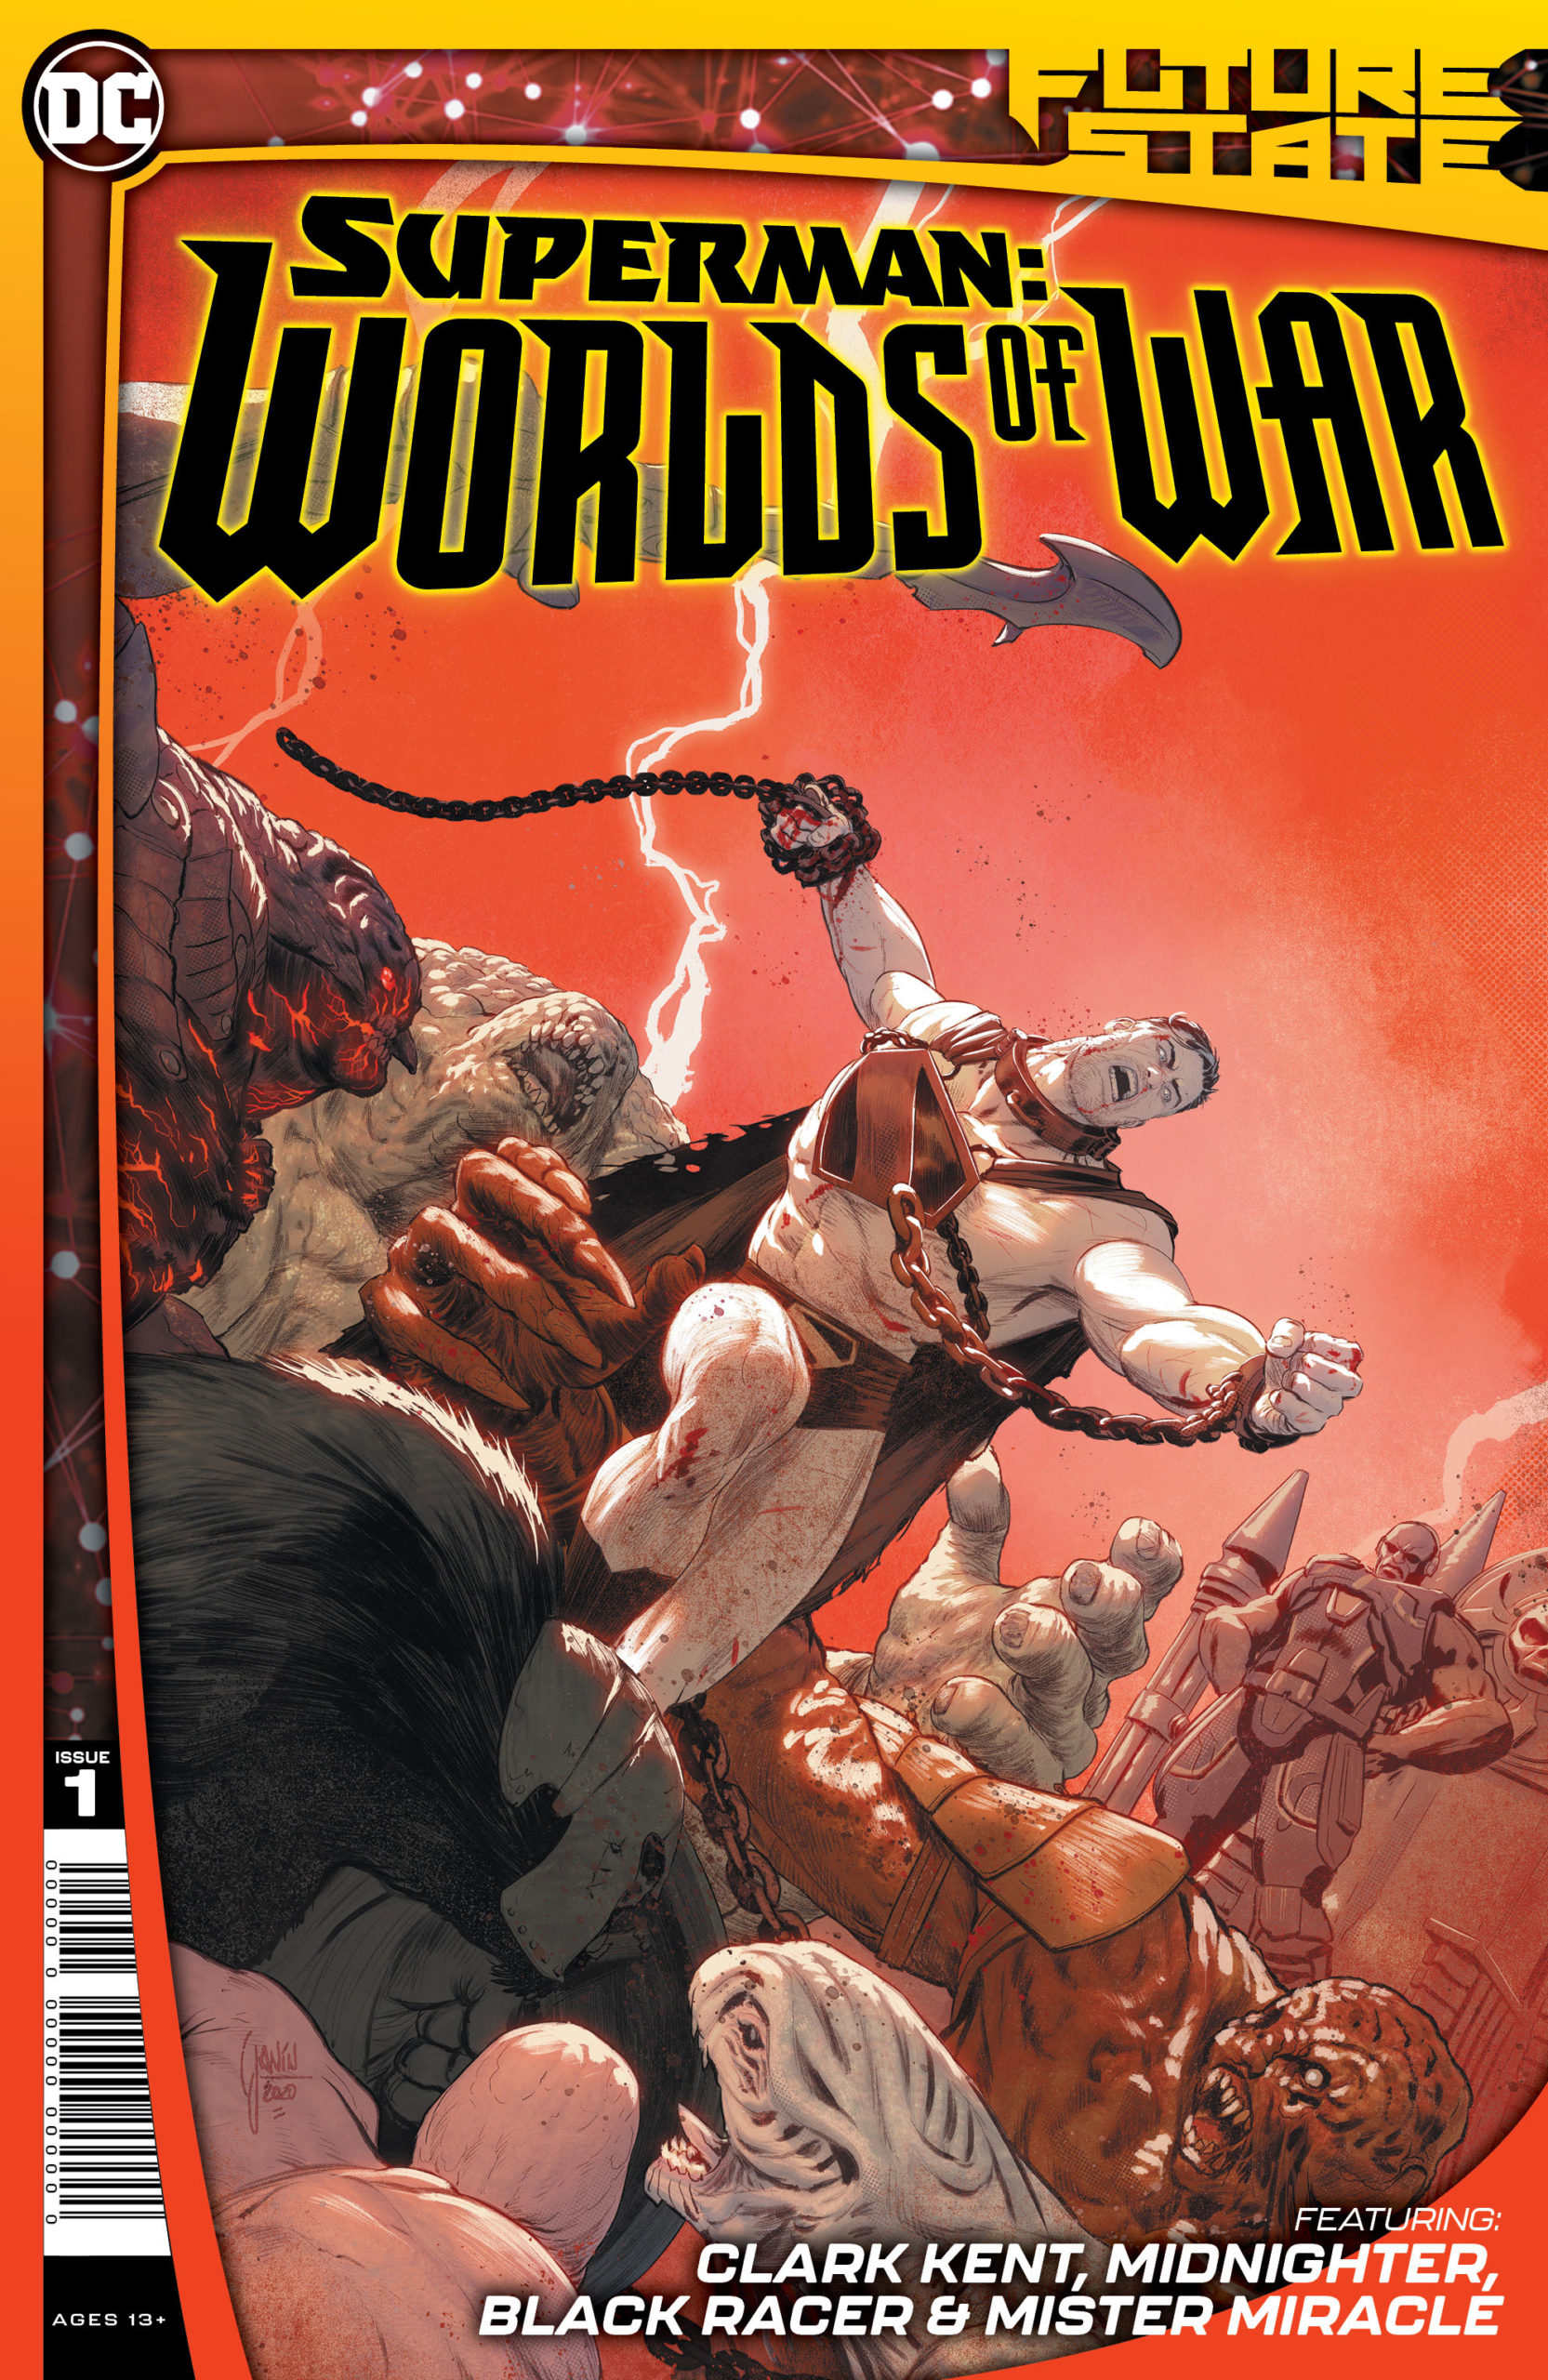 Superman, chained at the wrists, struggles against a horde of monstrous creatures. Cover art by Mikel Janin.